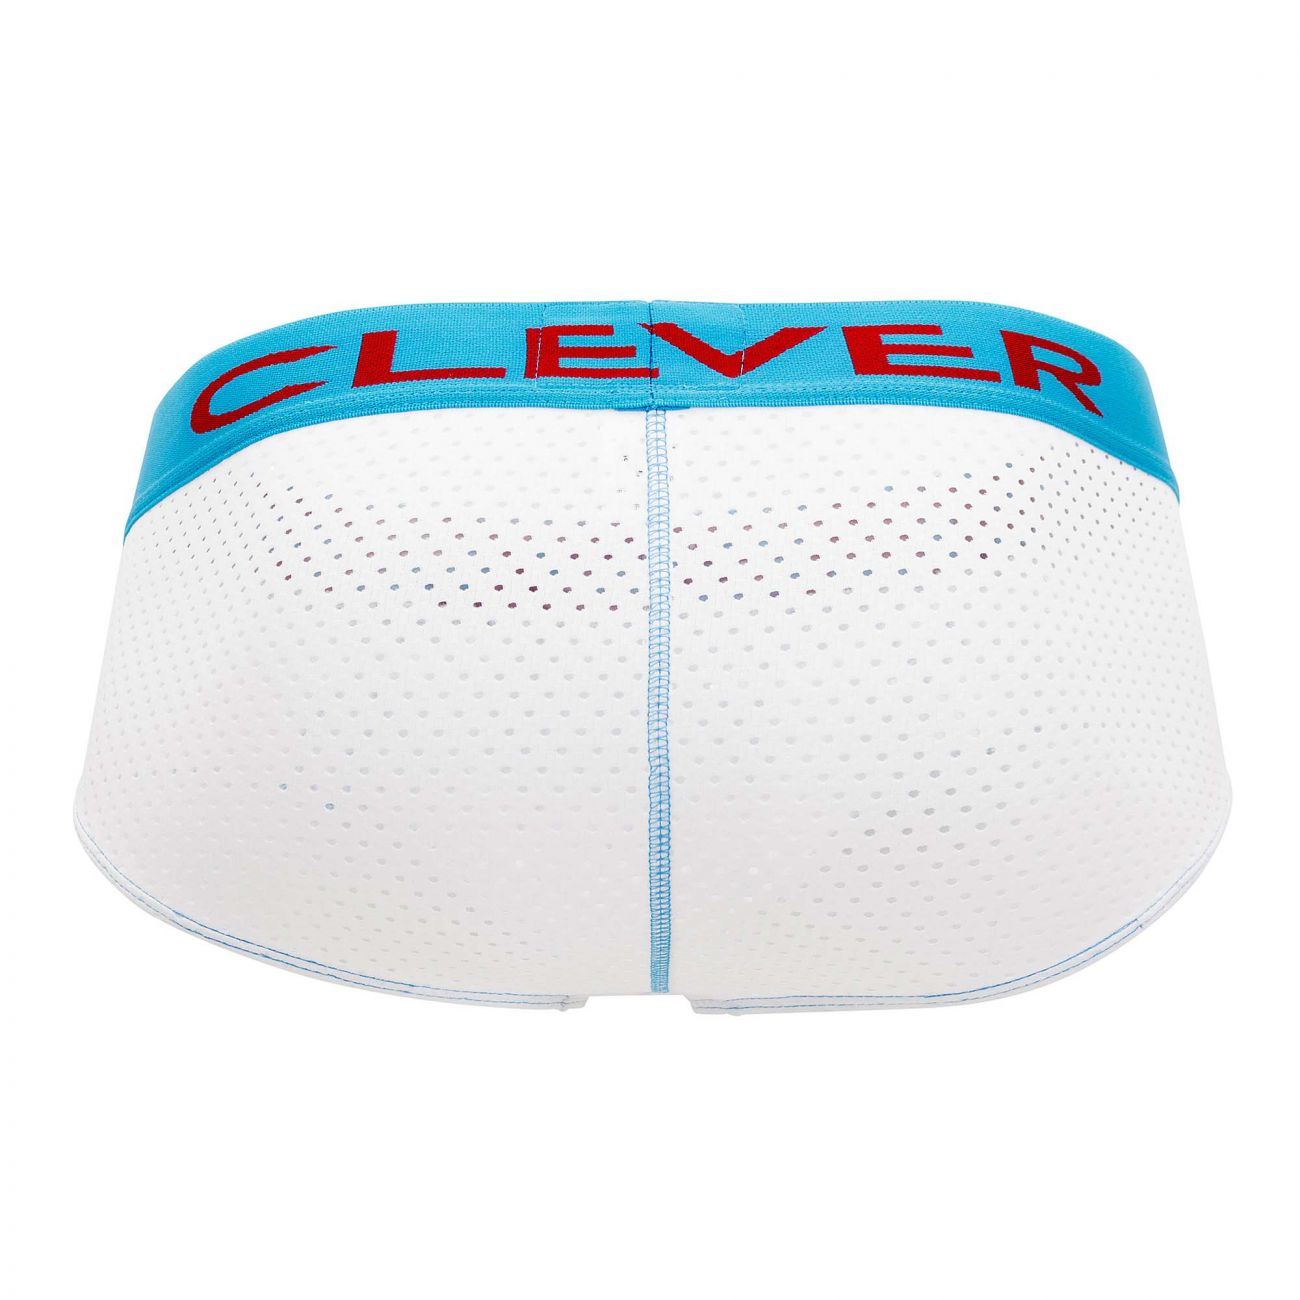 Clever 0421 Requirement Briefs White